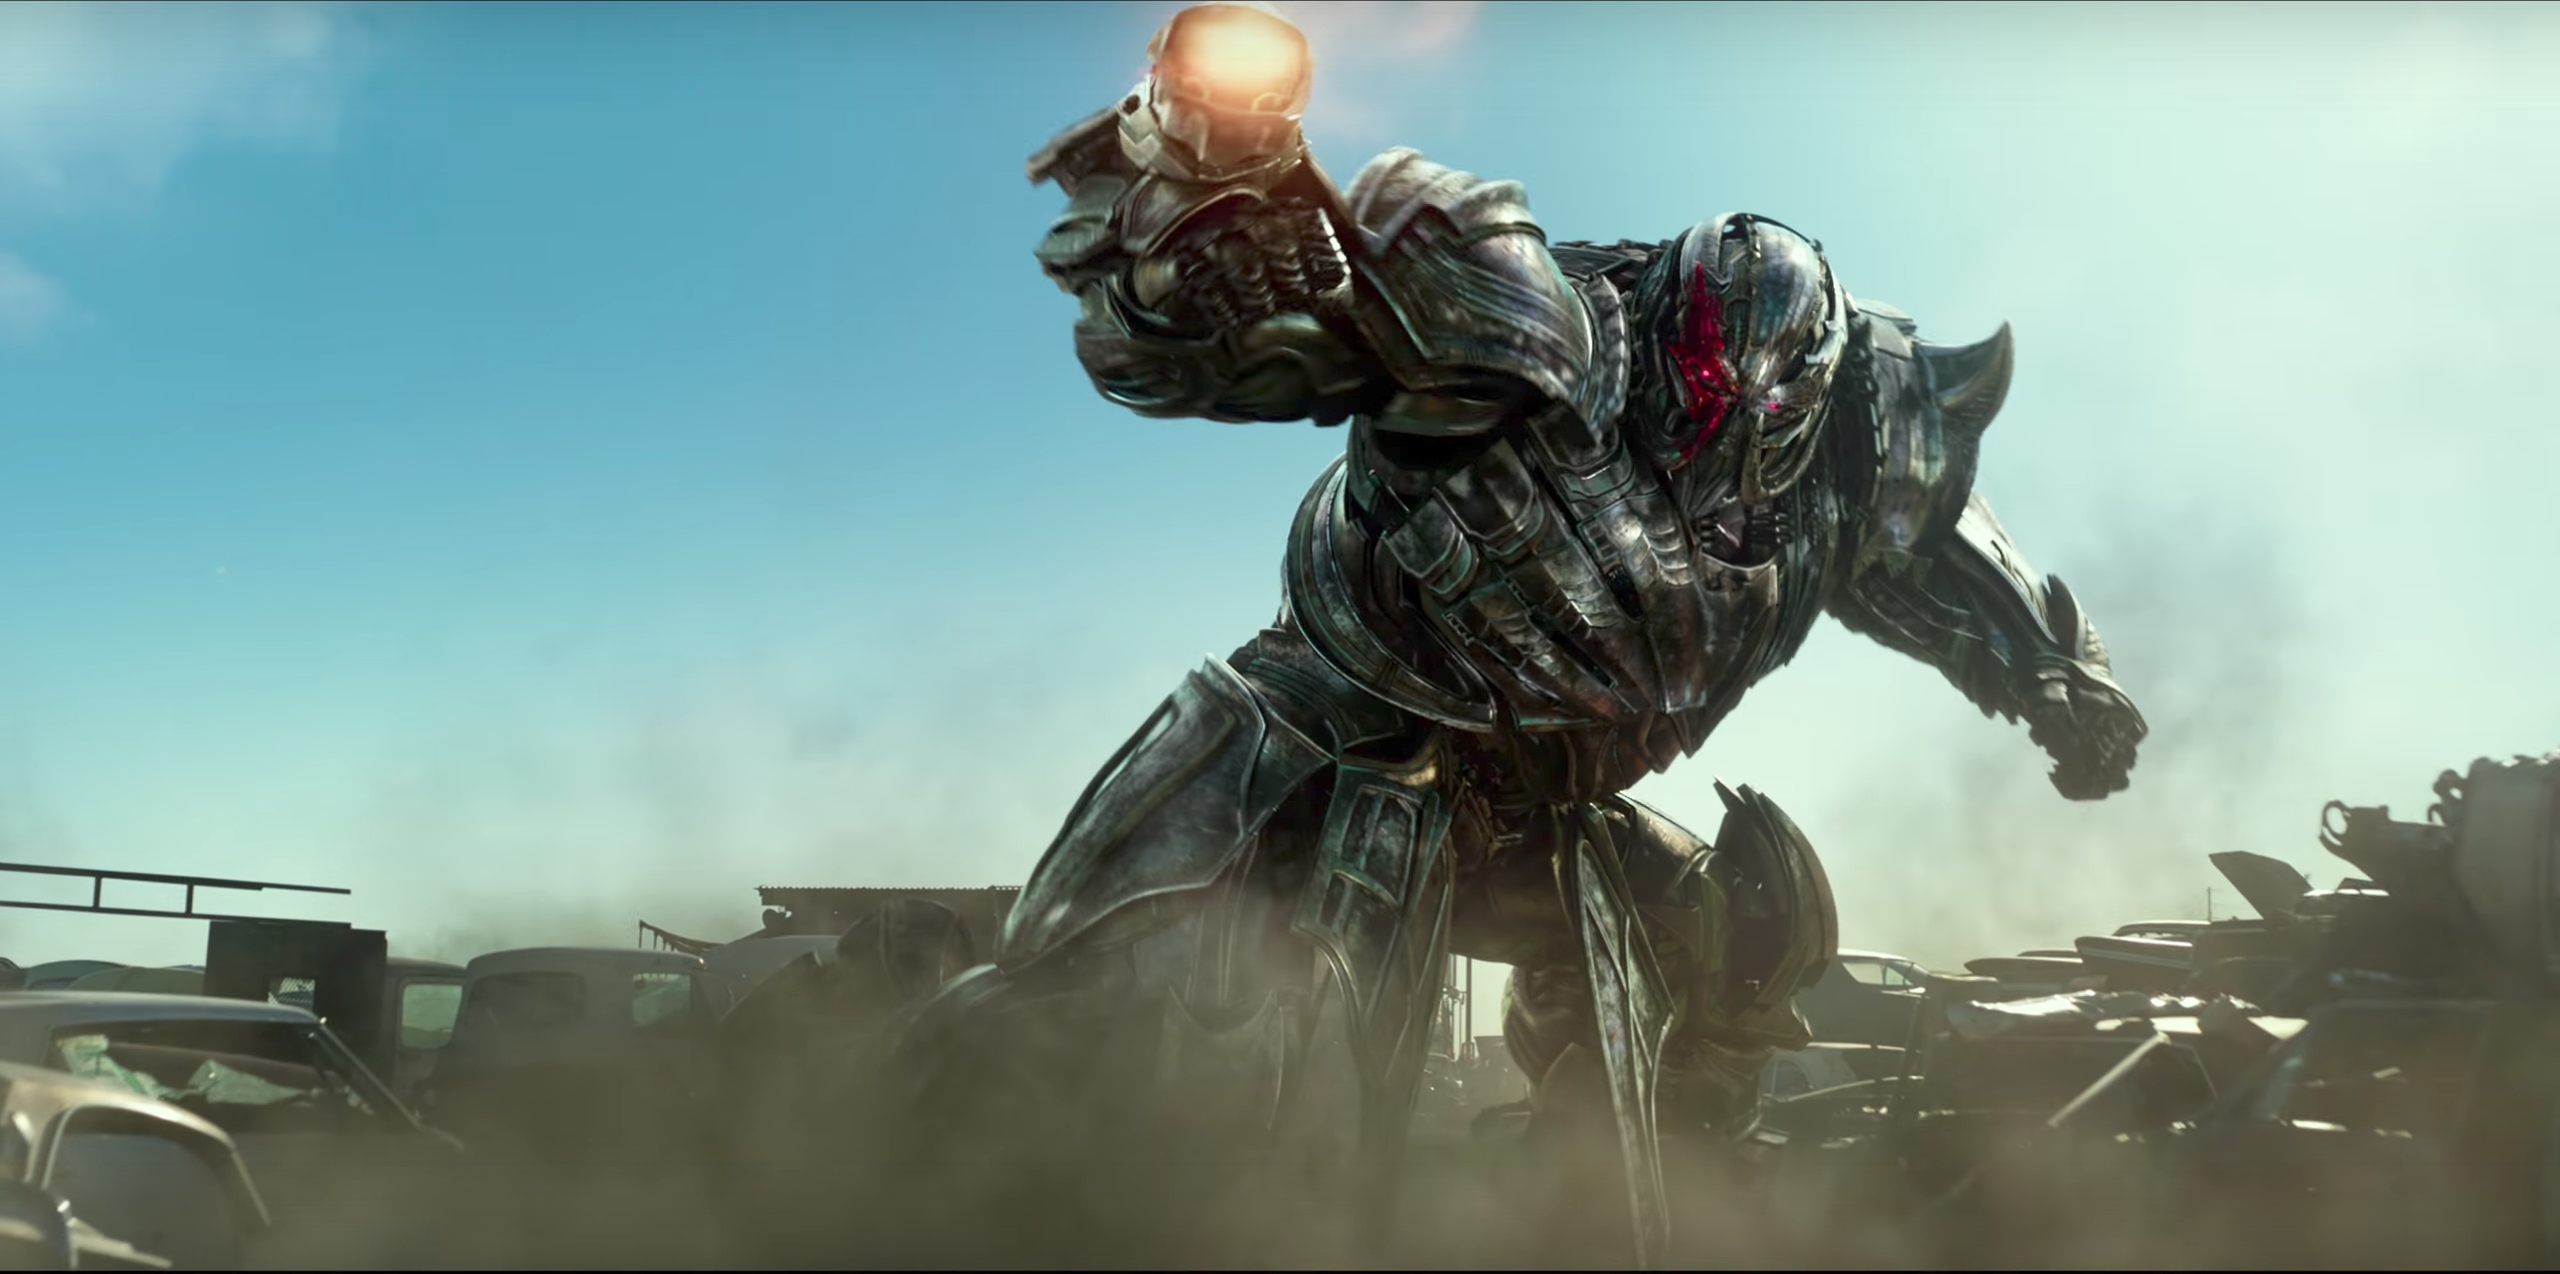 CRACKED.com — Michael Bay gave the part of Megatron in